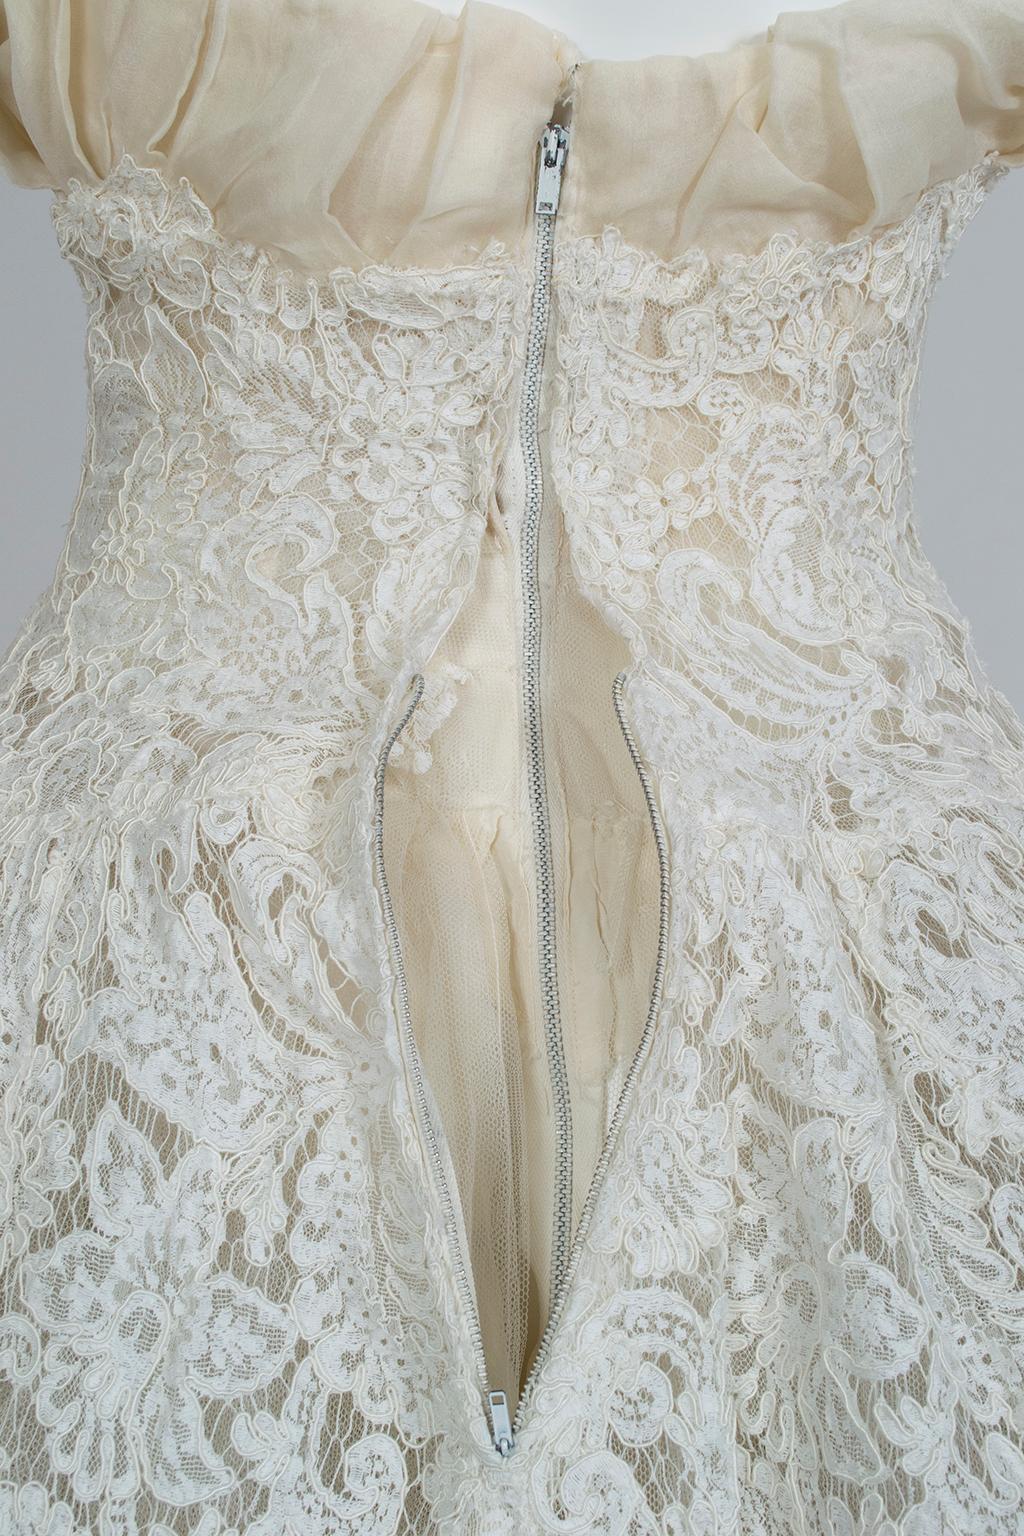 Strapless Ivory Guipure Lace Corseted Robe Française Wedding Dress - XS, 1950s 8